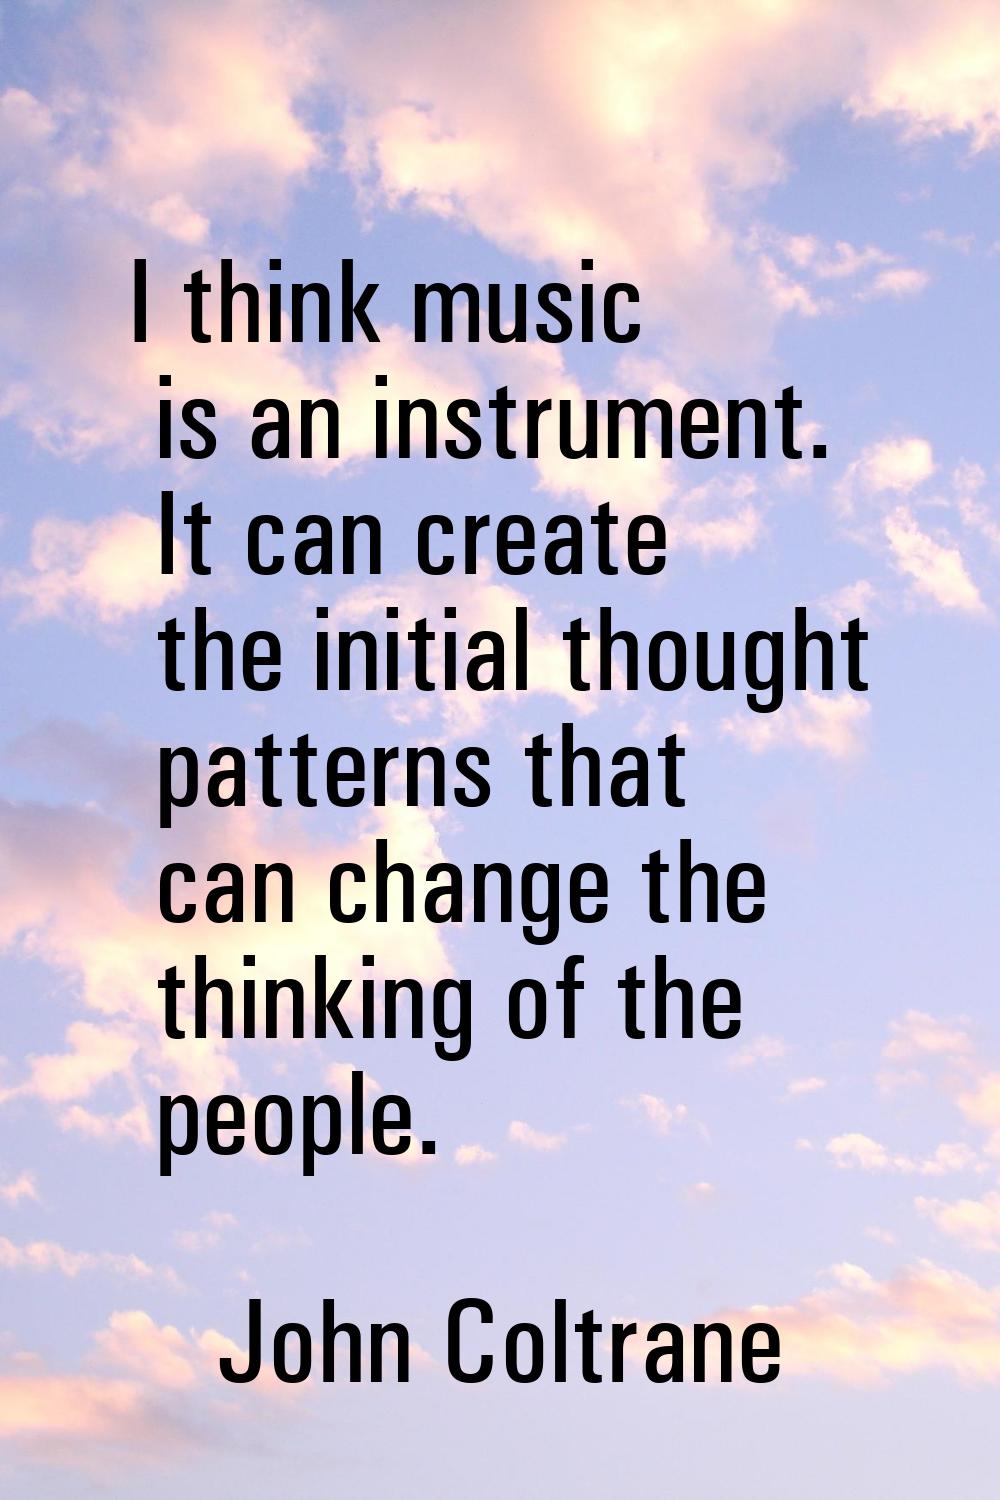 I think music is an instrument. It can create the initial thought patterns that can change the thin